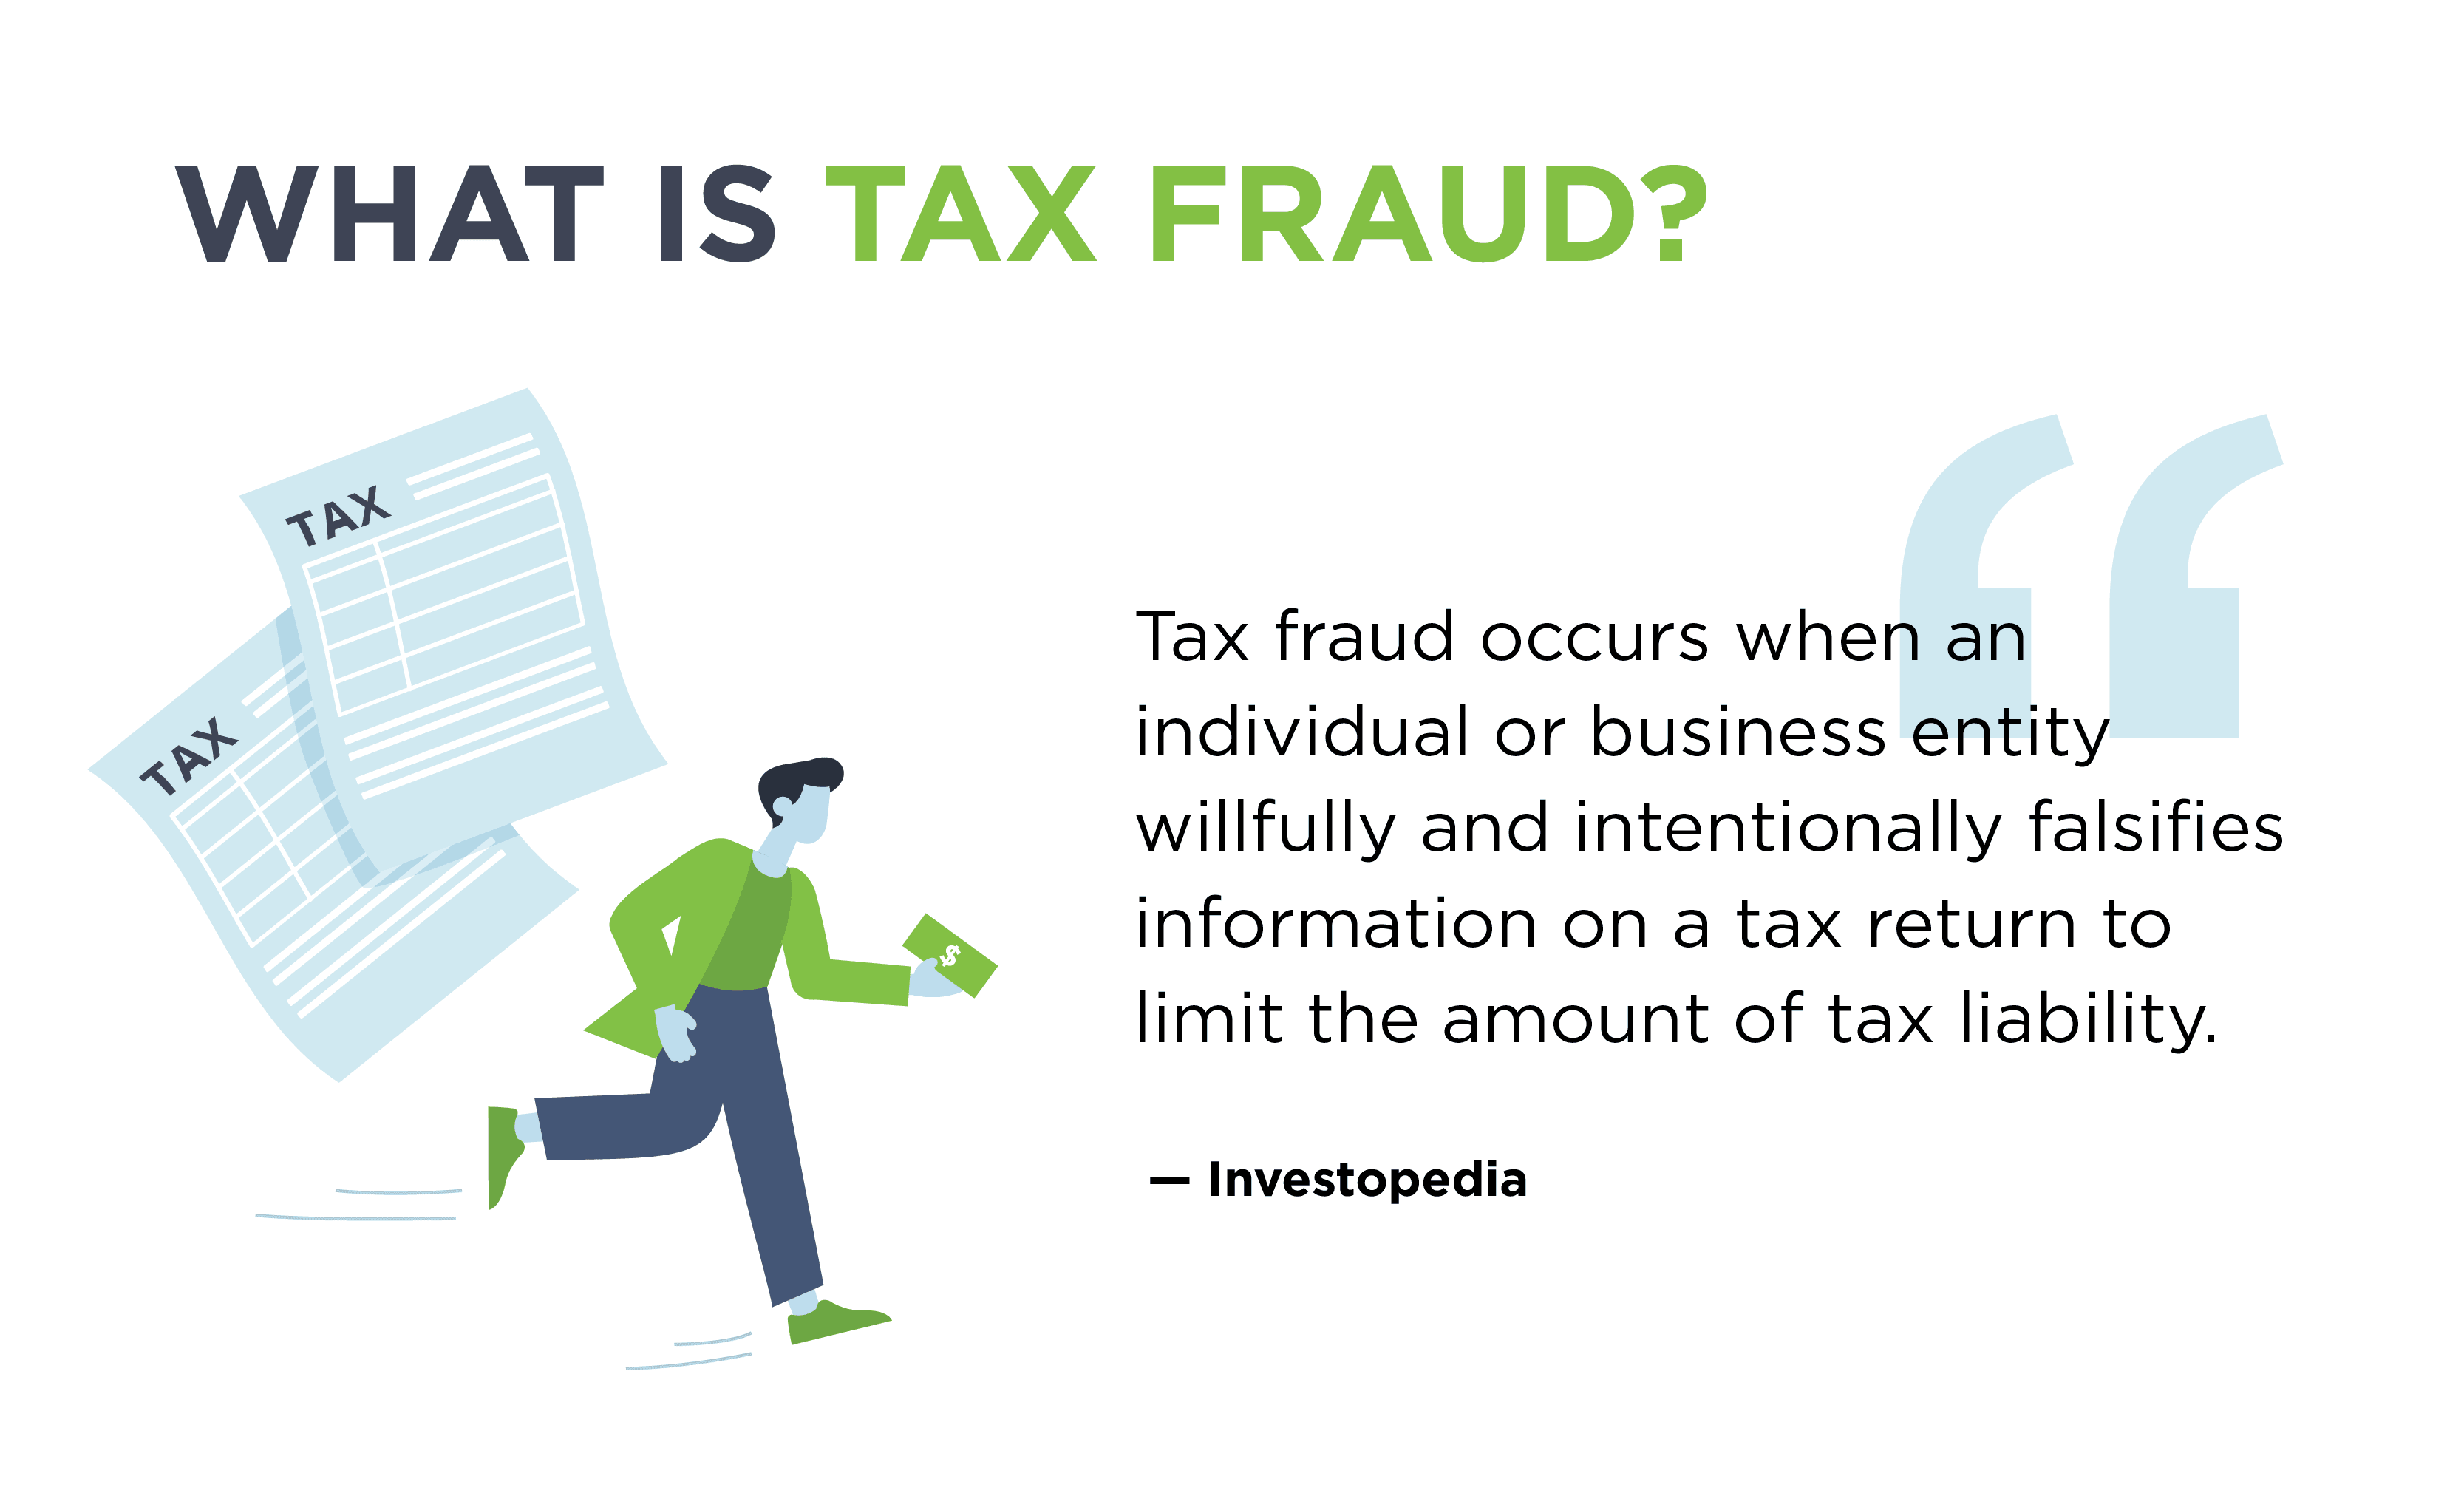 Definition of what tax fraud is with illustration of man running from tax returns.